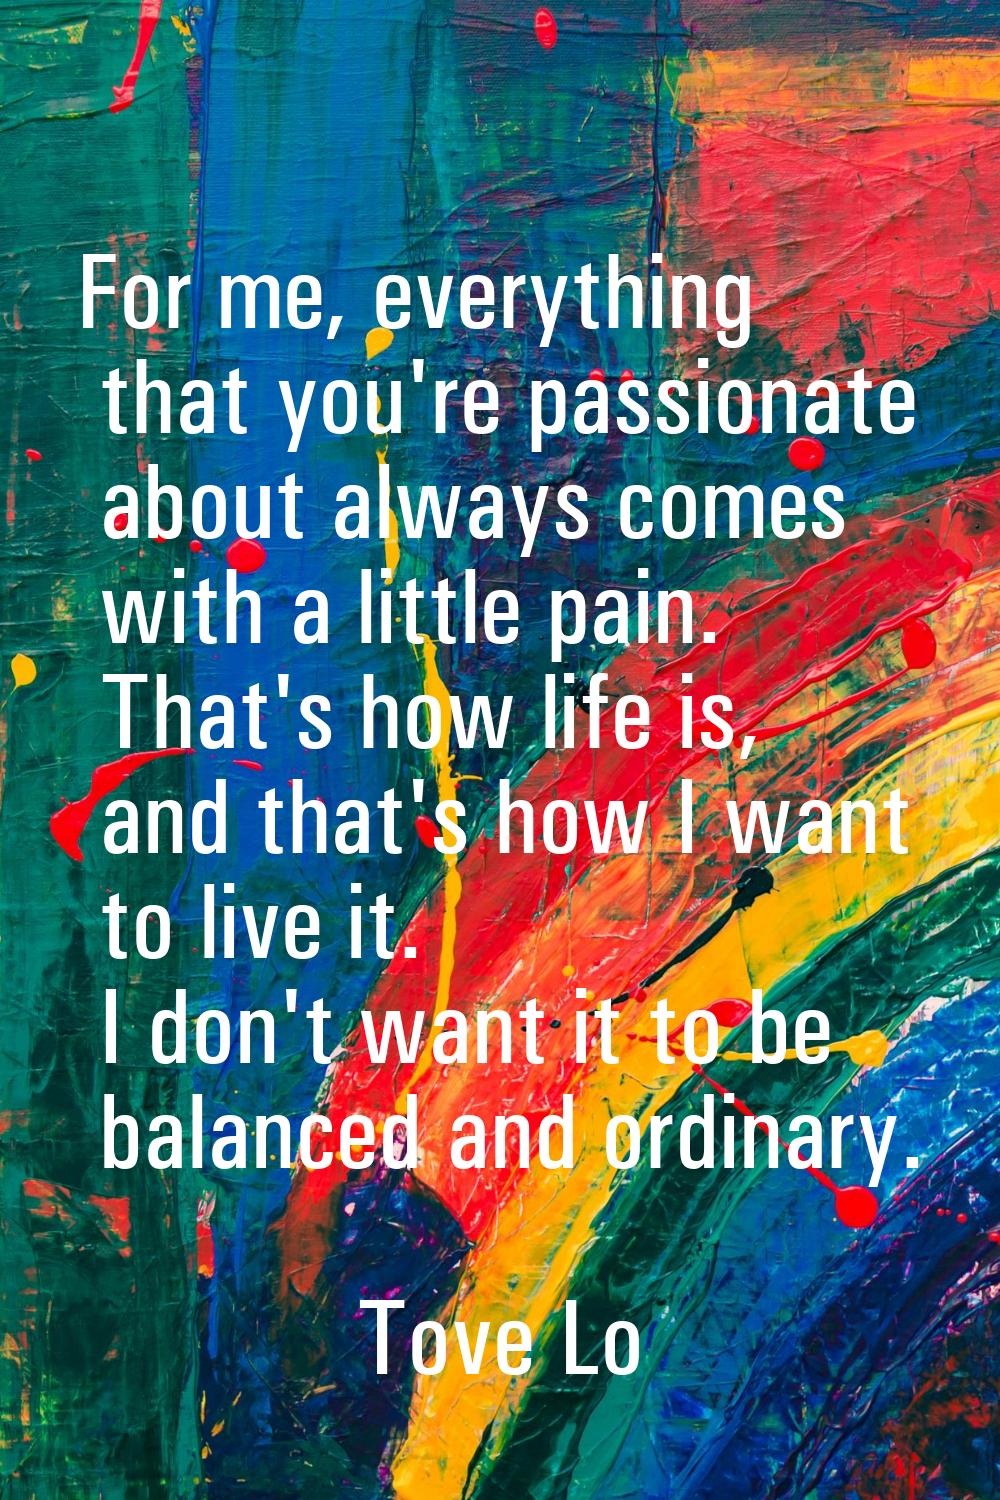 For me, everything that you're passionate about always comes with a little pain. That's how life is